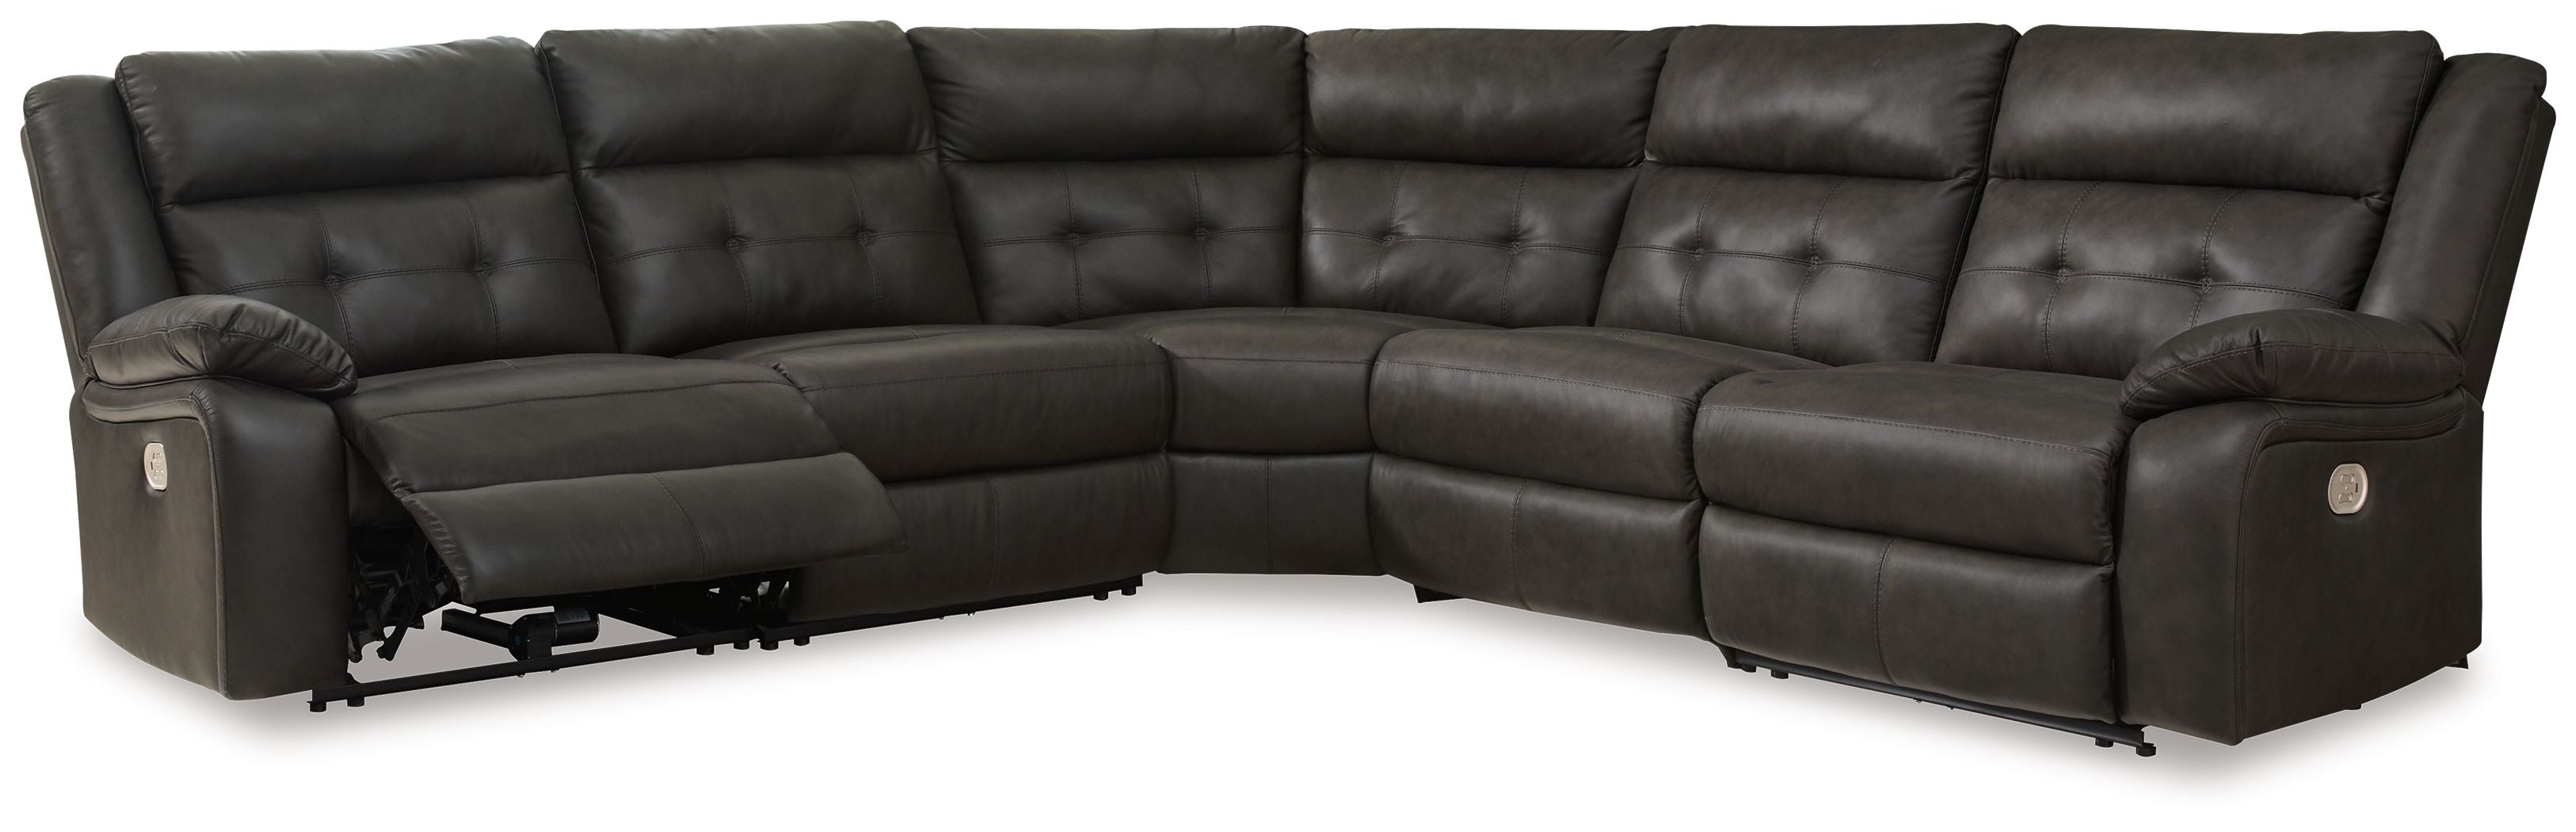 Mackie Pike Black Power Reclining Sectional